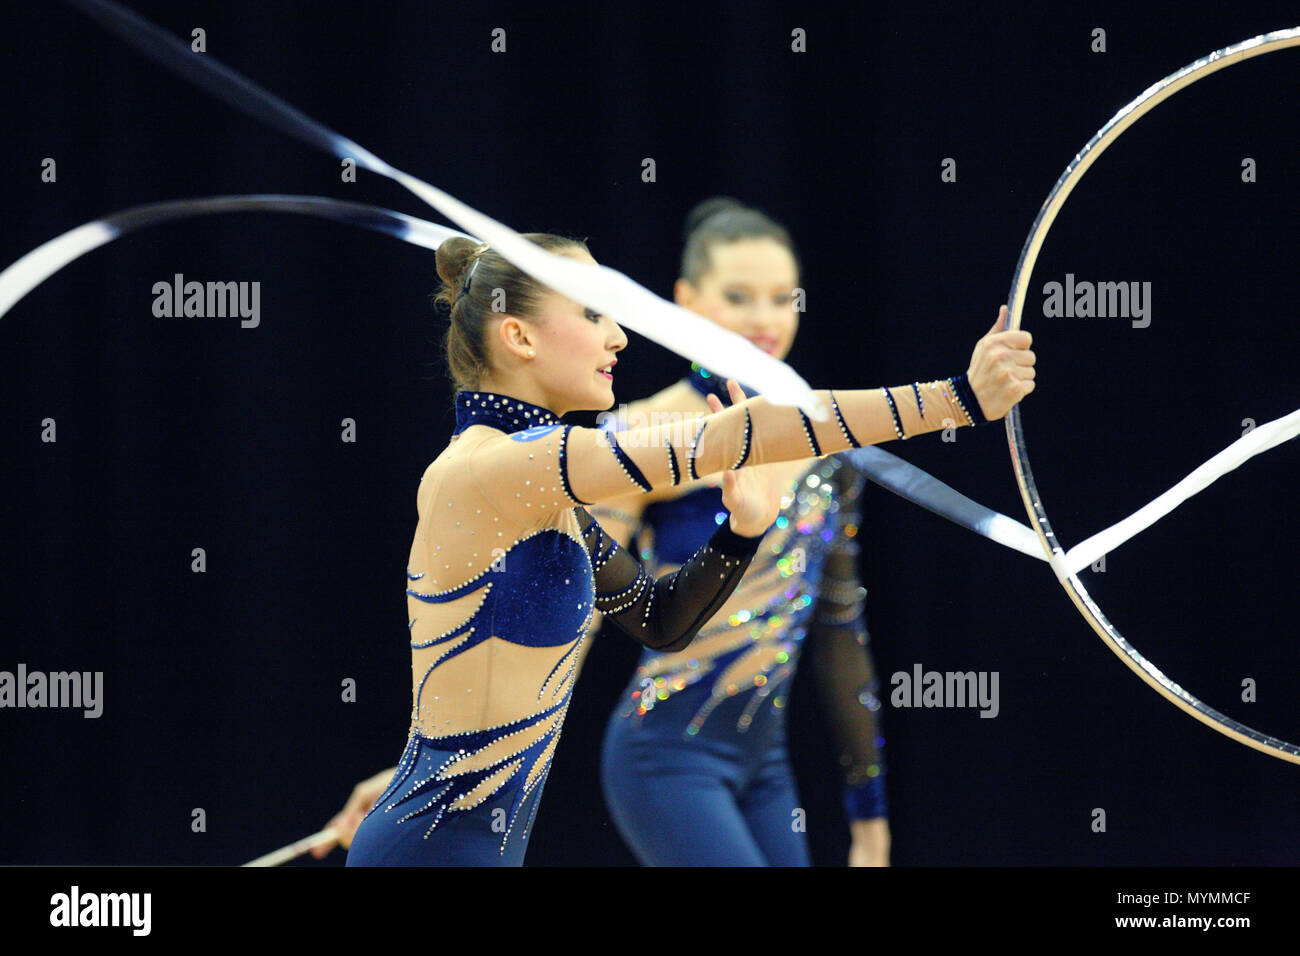 Visa Federation of International Gymnastics (FIG) - The team from France perform with the Ribbon and Hoop during the Women's Group Rhythmic Final Olympic qualification event at the O2 Arena London 18 January 2012 --- Image by © Paul Cunningham Stock Photo